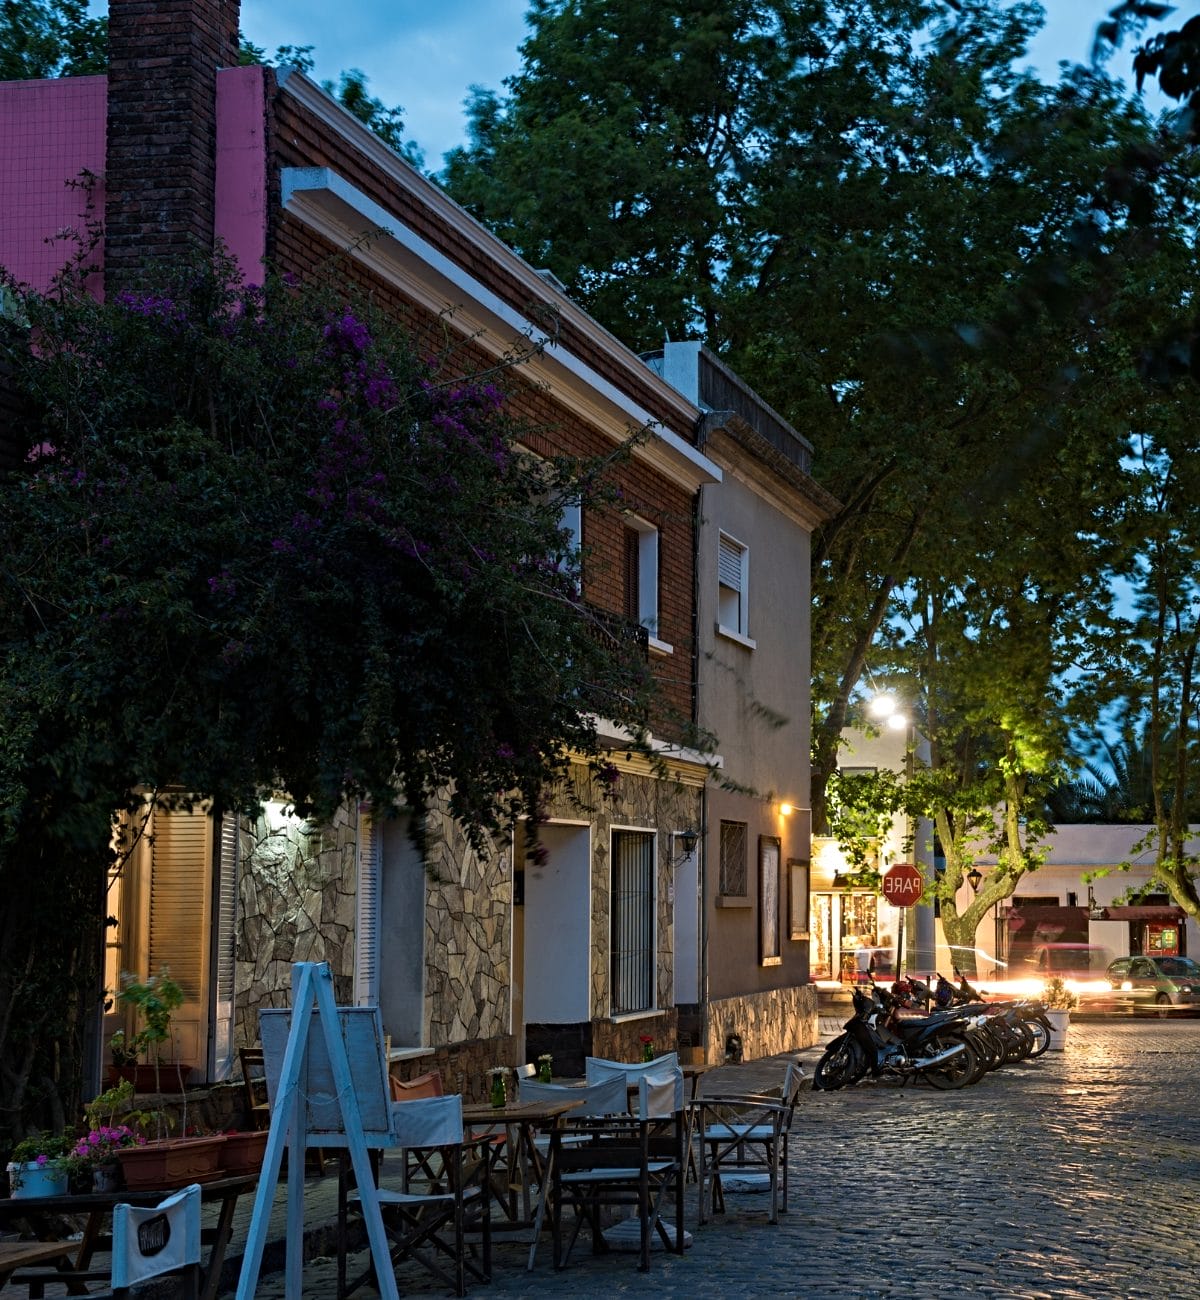 An old narrow paved street of Colonia del Sacramento in the eveningm lit by street lights. a little empty cafe with tables outside, a very cozy atmosphere. 